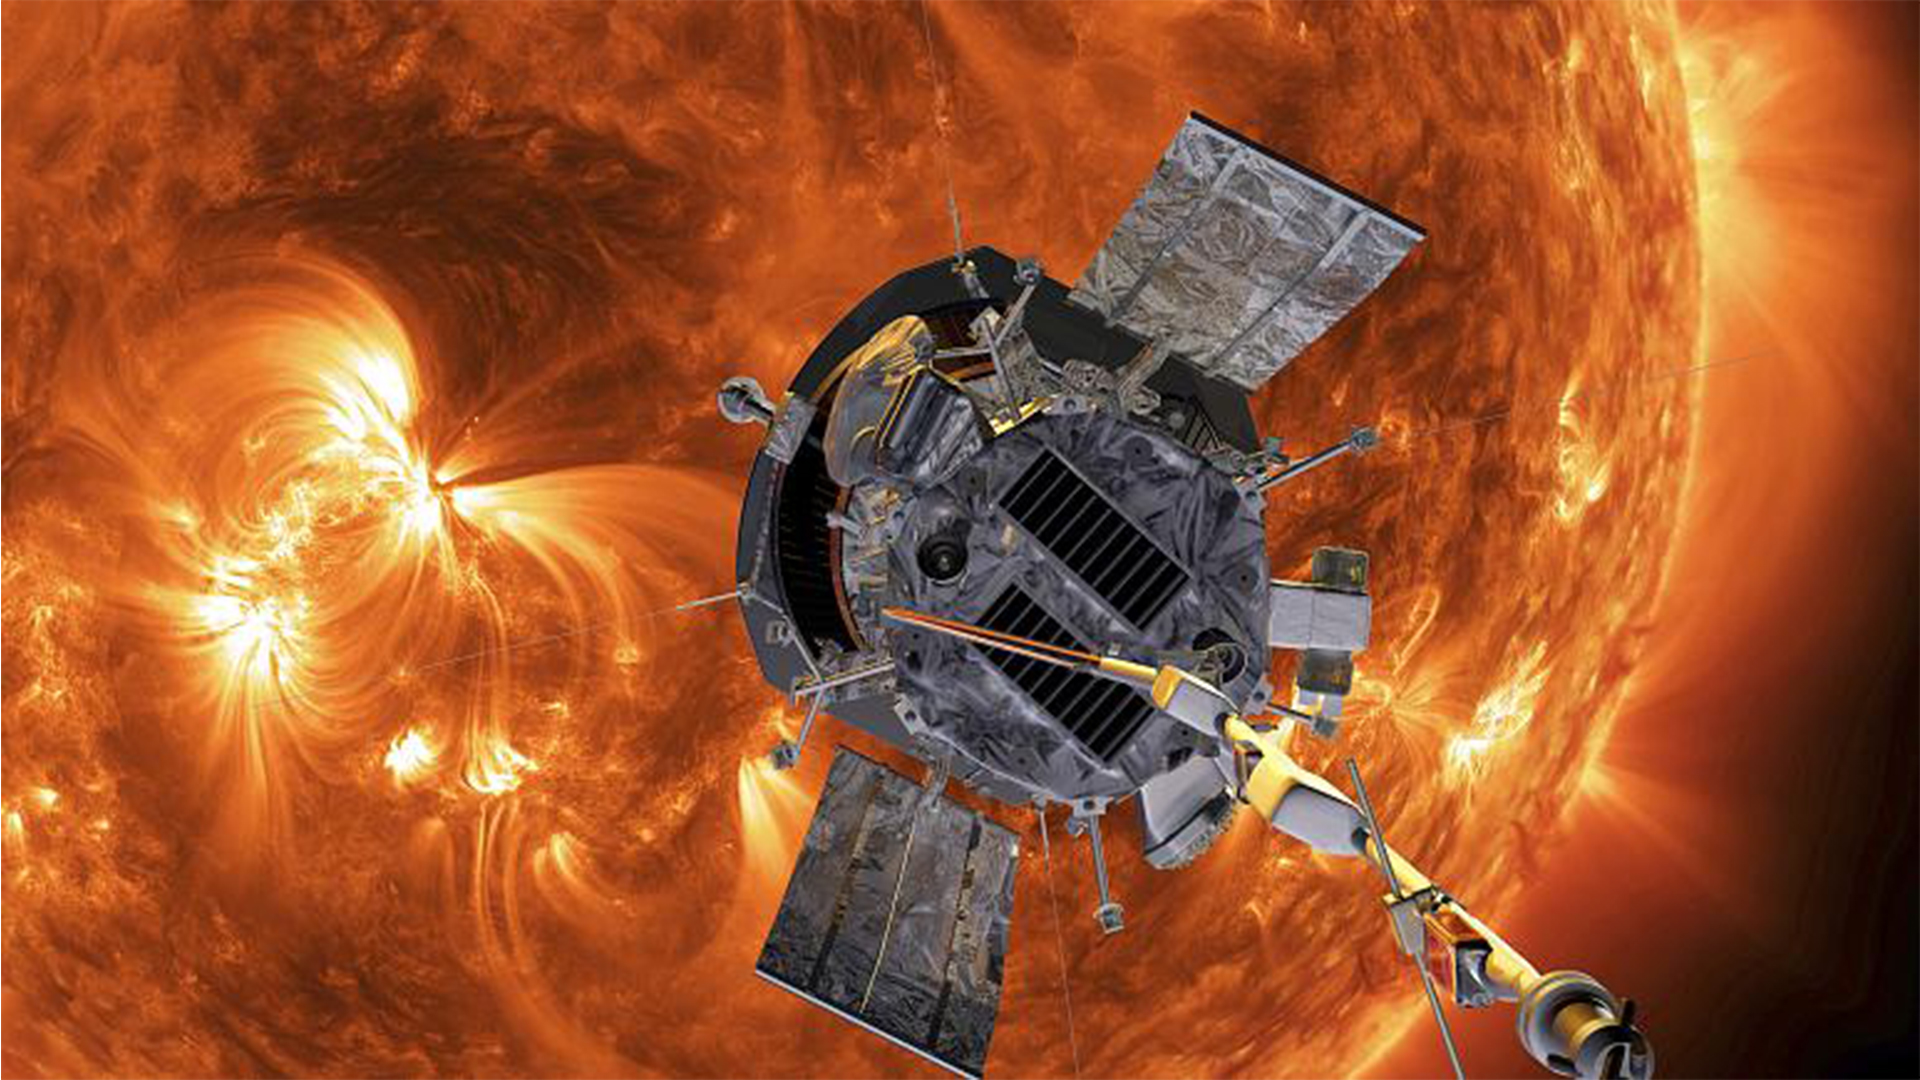  This image made available by NASA shows an artist's rendering of the Parker Solar Probe approaching the Sun.   -   Copyright  Steve Gribben/Johns Hopkins APL/NASA via AP